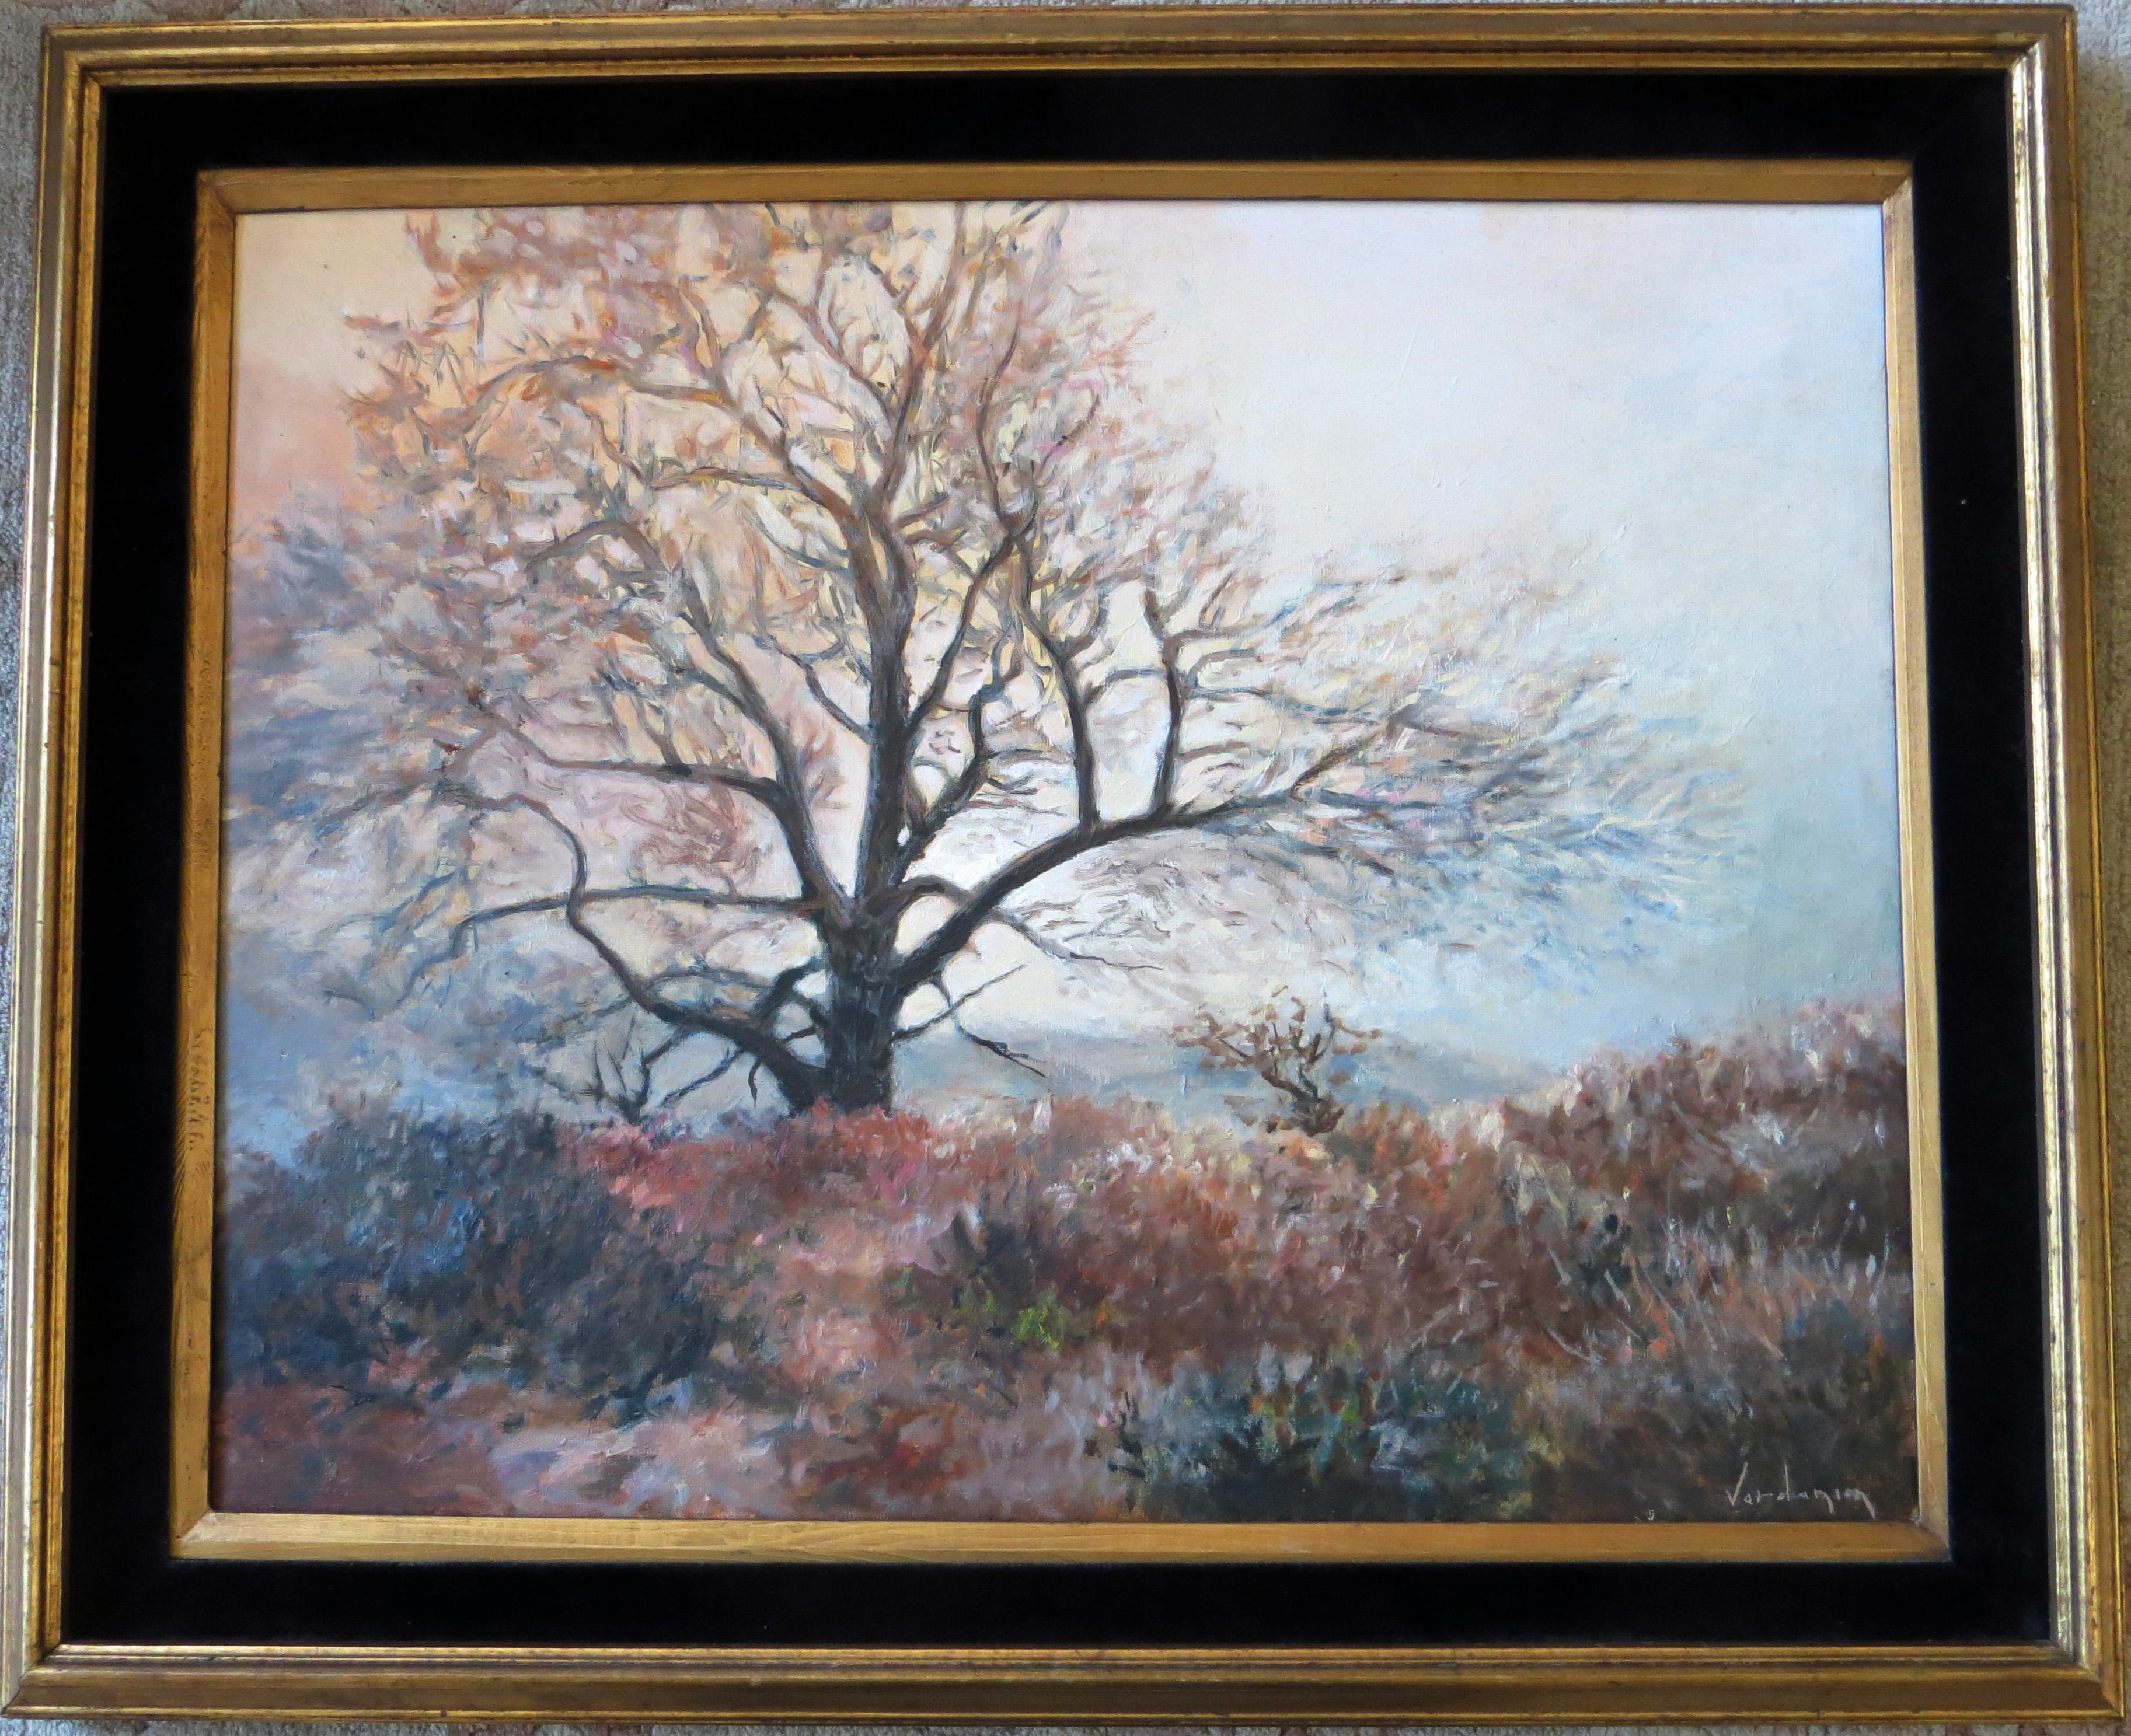 This beautiful oil on canvas painting is by Serop Vardanian (1914-1997). Vardanian is best known for his depictions of trees, and this one, titled “The Giant” has a warm radiance. Serop Vardanian is an Armenian American artist. He was born in Iran,